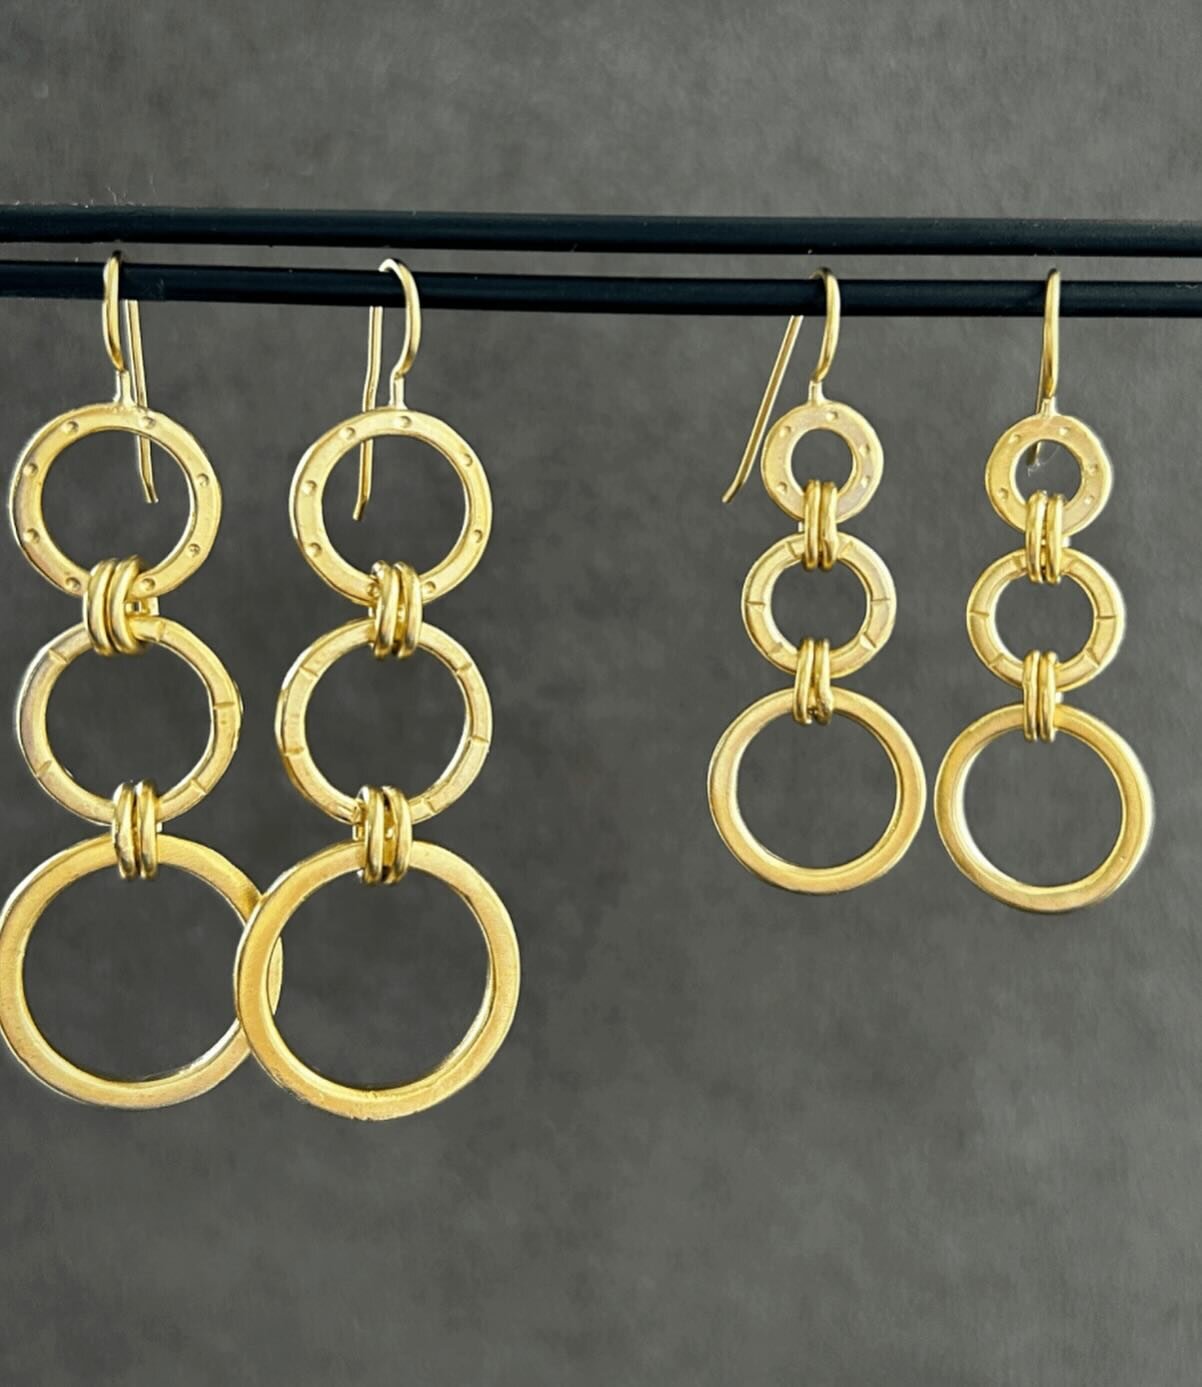 New mini vermeil 3 ring earrings and Betsy earrings now available online, just in time for the holidays!
These babies are super versatile, super spunky and super comfy!
They will take you from day to night seamlessly&hellip;
Grab these for your beaut